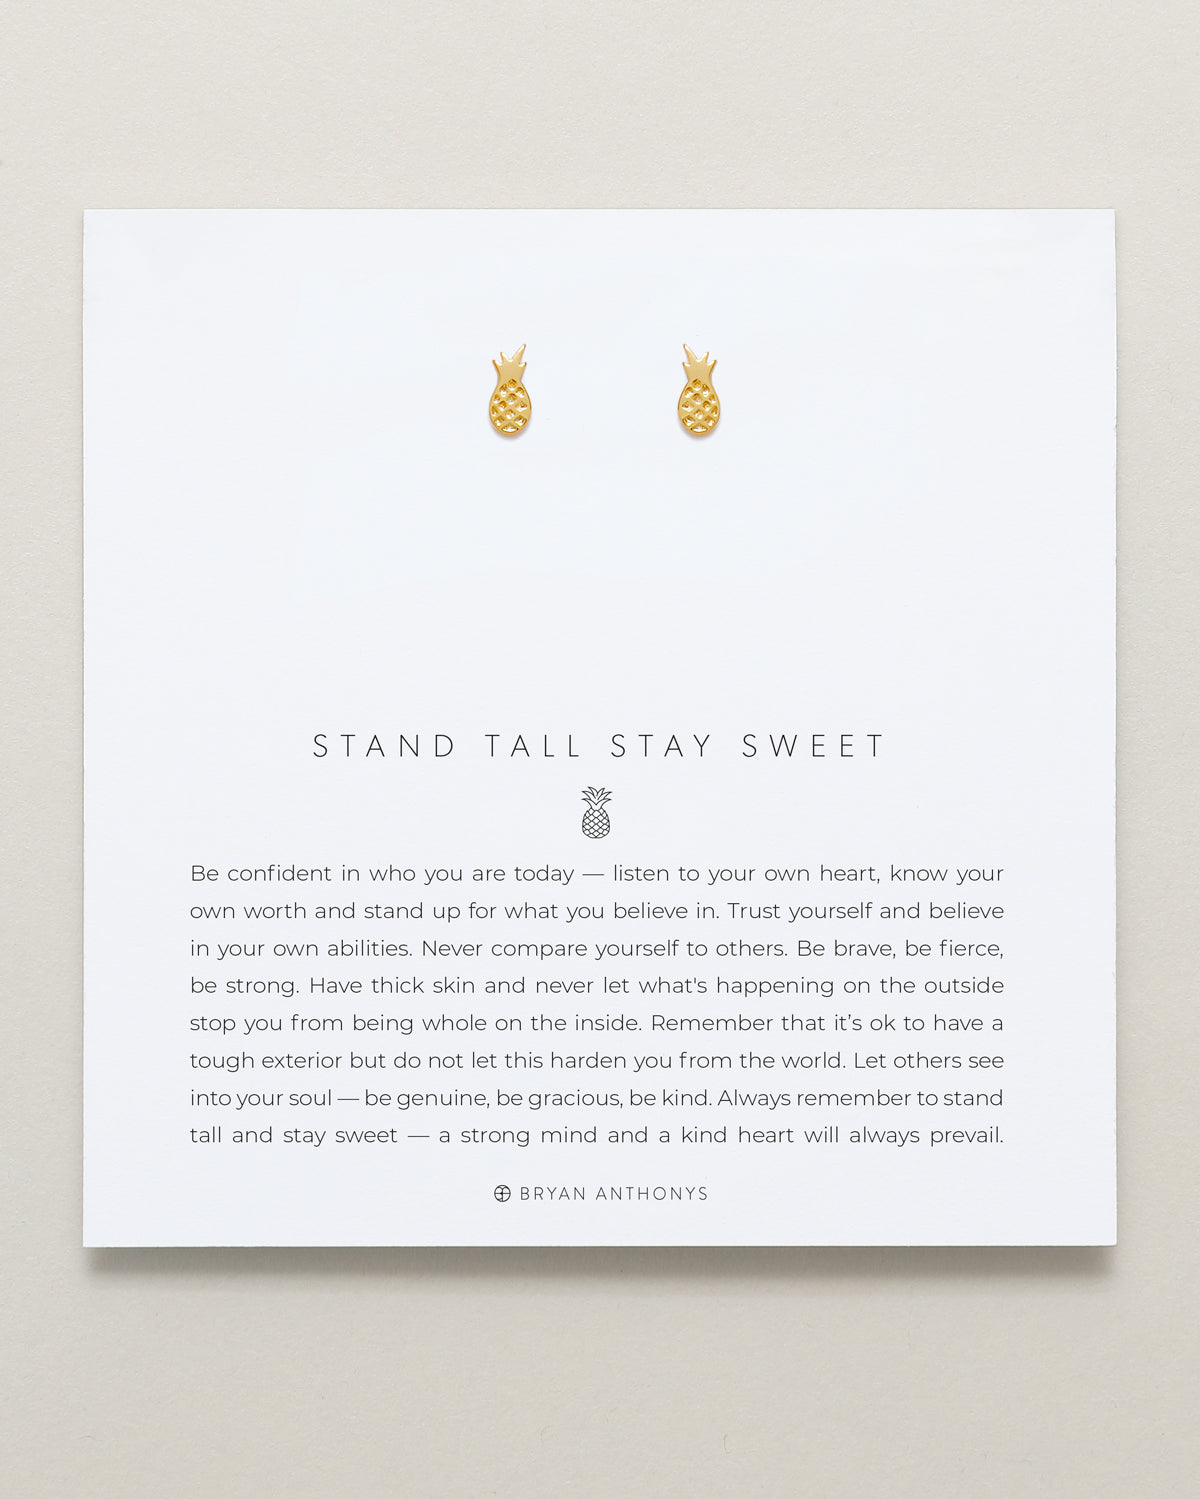 Bryan Anthonys Stand Tall Stay Sweet Gold Stud Earrings on card